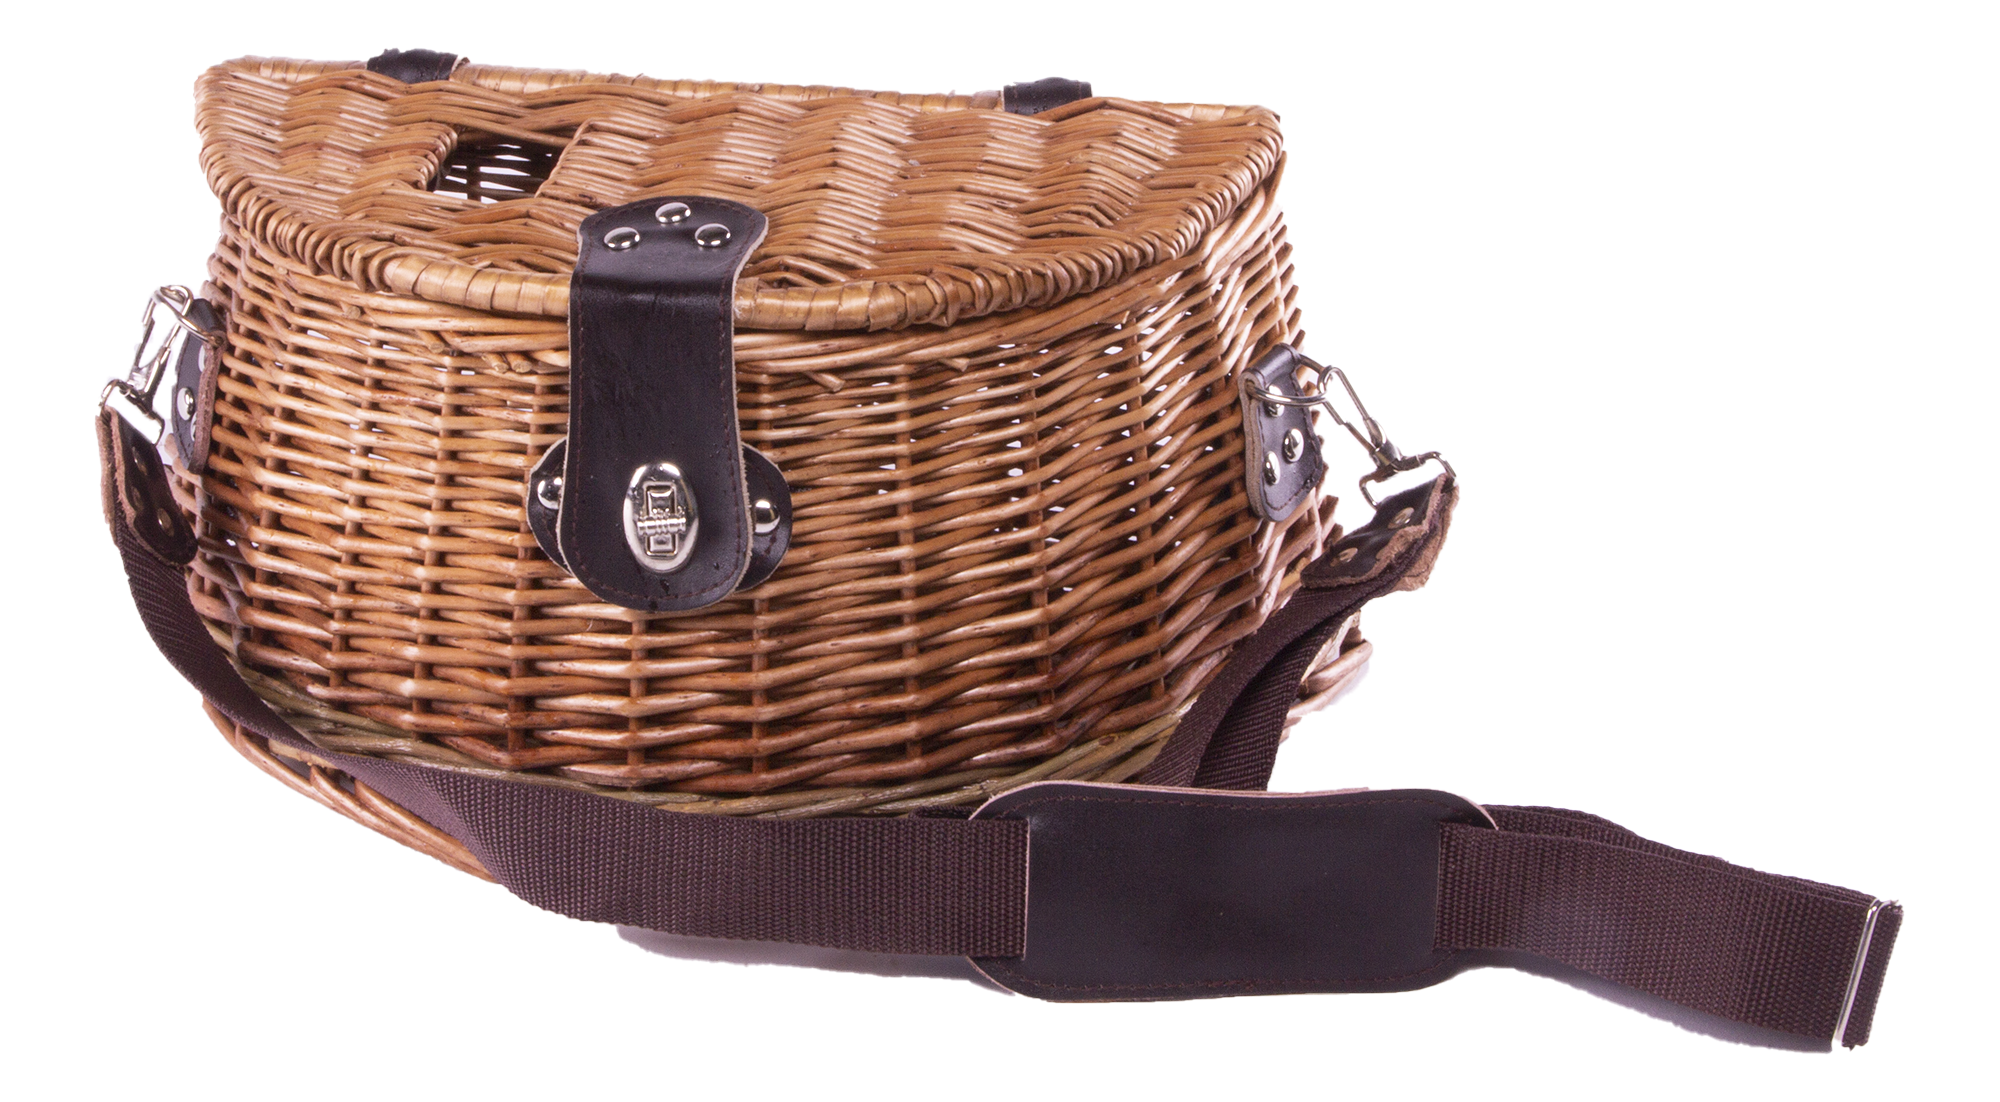 Fly Fishing Creel – Home Products Basketware